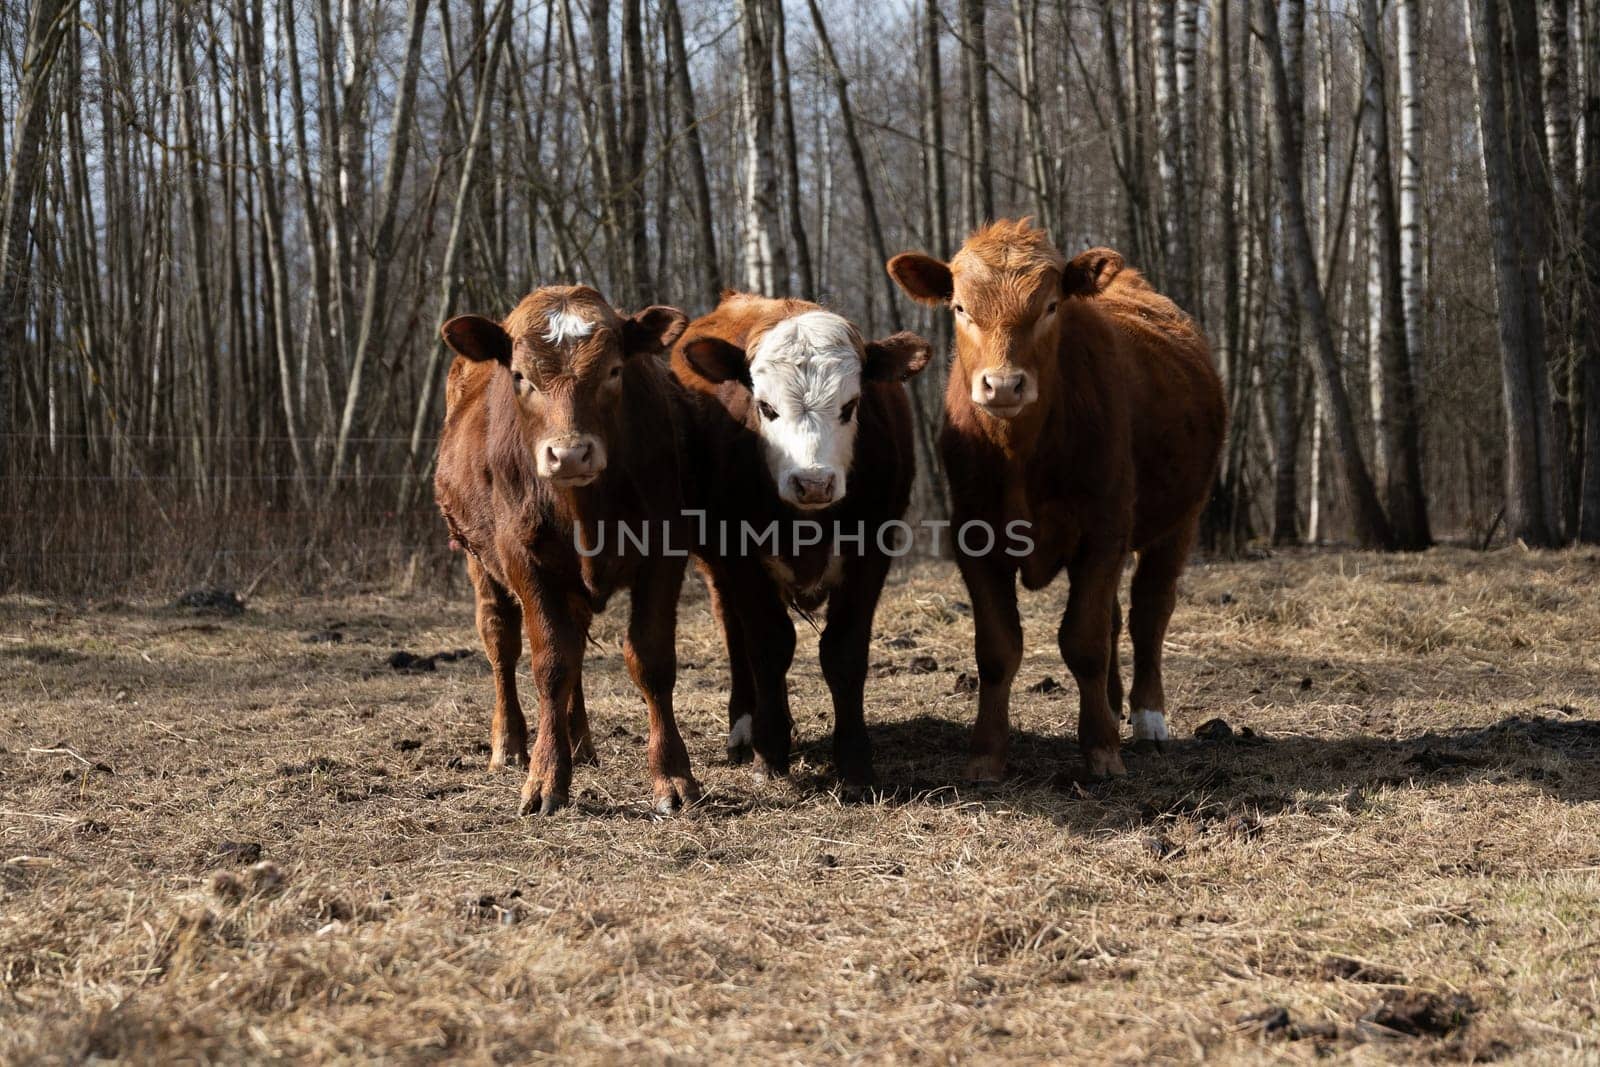 Three cows are standing in a grassy field, with trees in the background. The cows are calmly grazing and observing their surroundings under the clear sky.